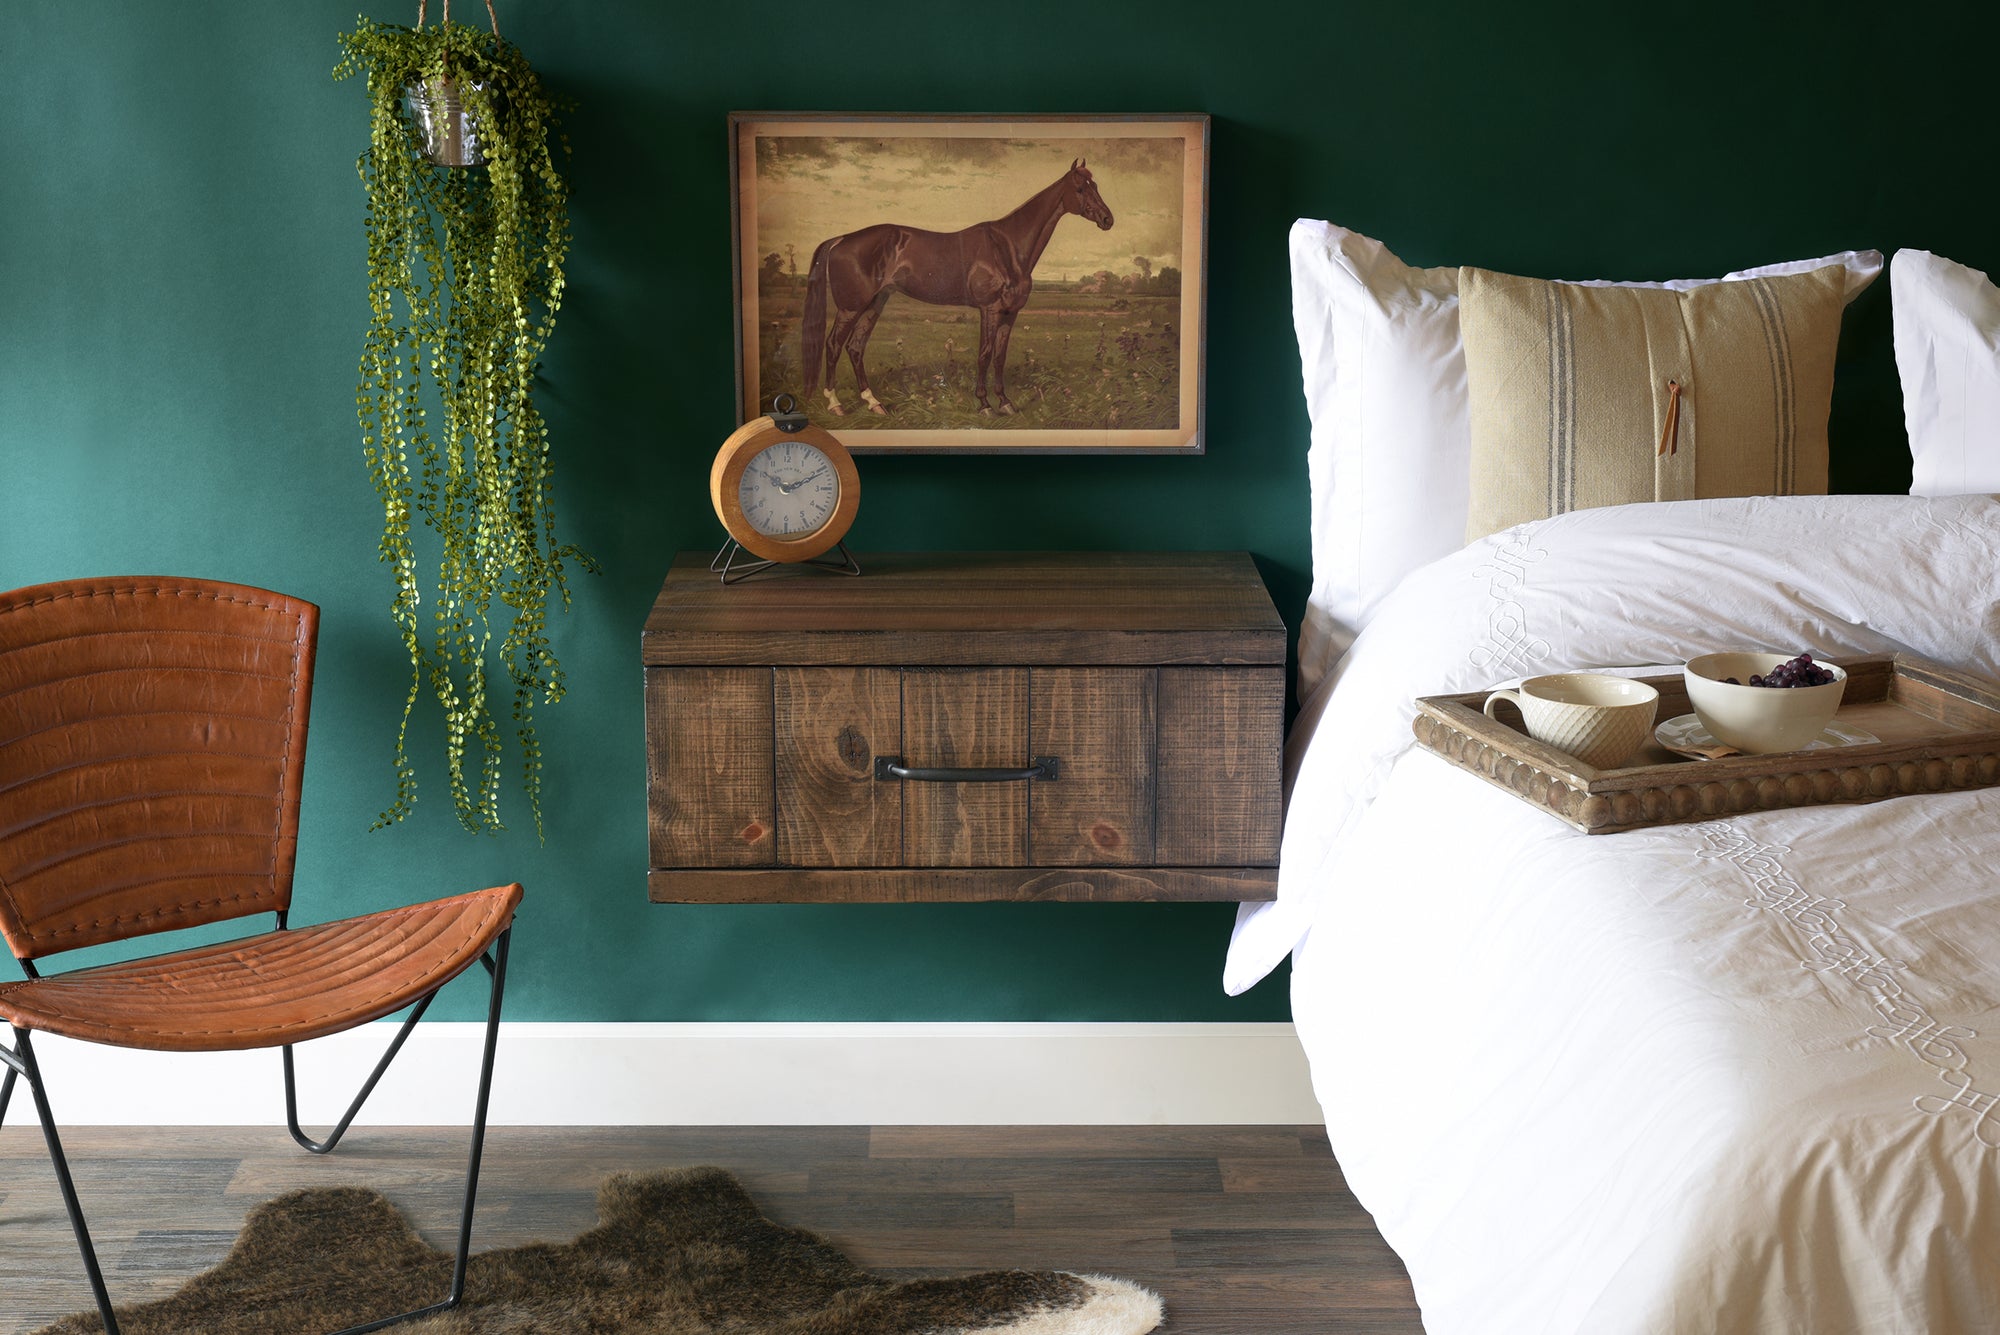 Floating Nightstands - Woodwaves - Rustic Wood Wall Mount Drawers - Farmhouse Collection - Spice